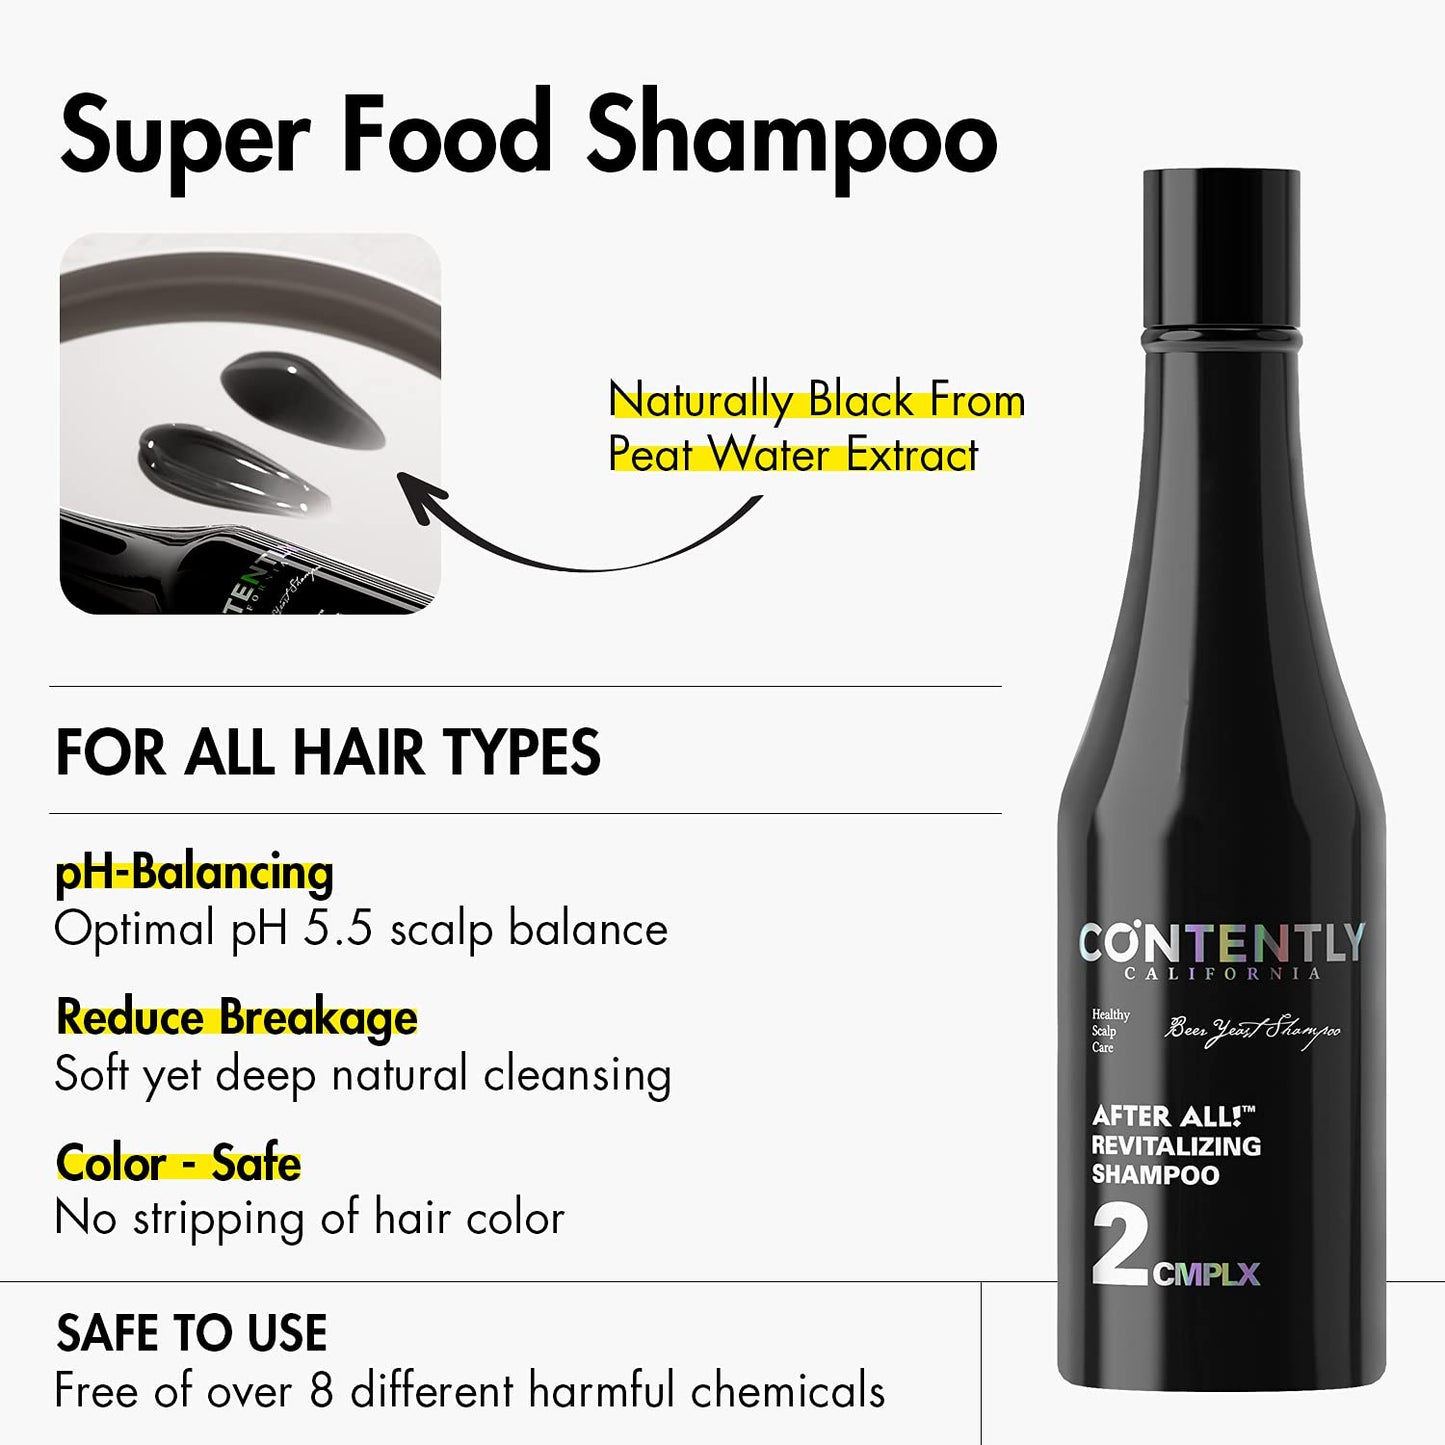 After all! Revitalizing Shampoo